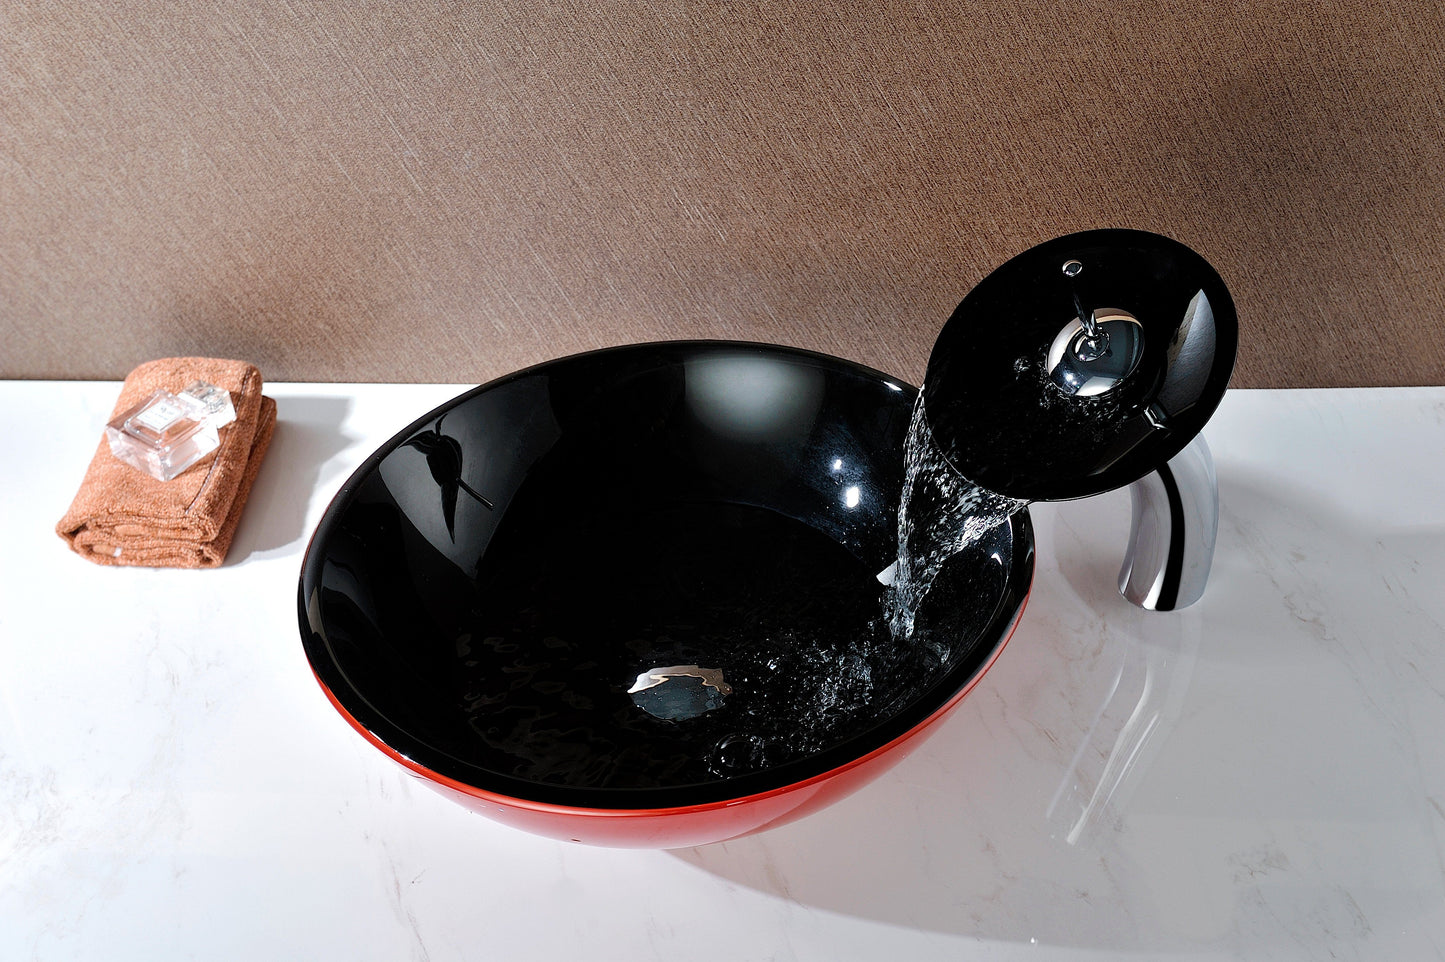 Chord Series Deco-Glass Vessel Sink in Lustrous Black and Red with Matching Chrome Waterfall Faucet - Luxe Bathroom Vanities